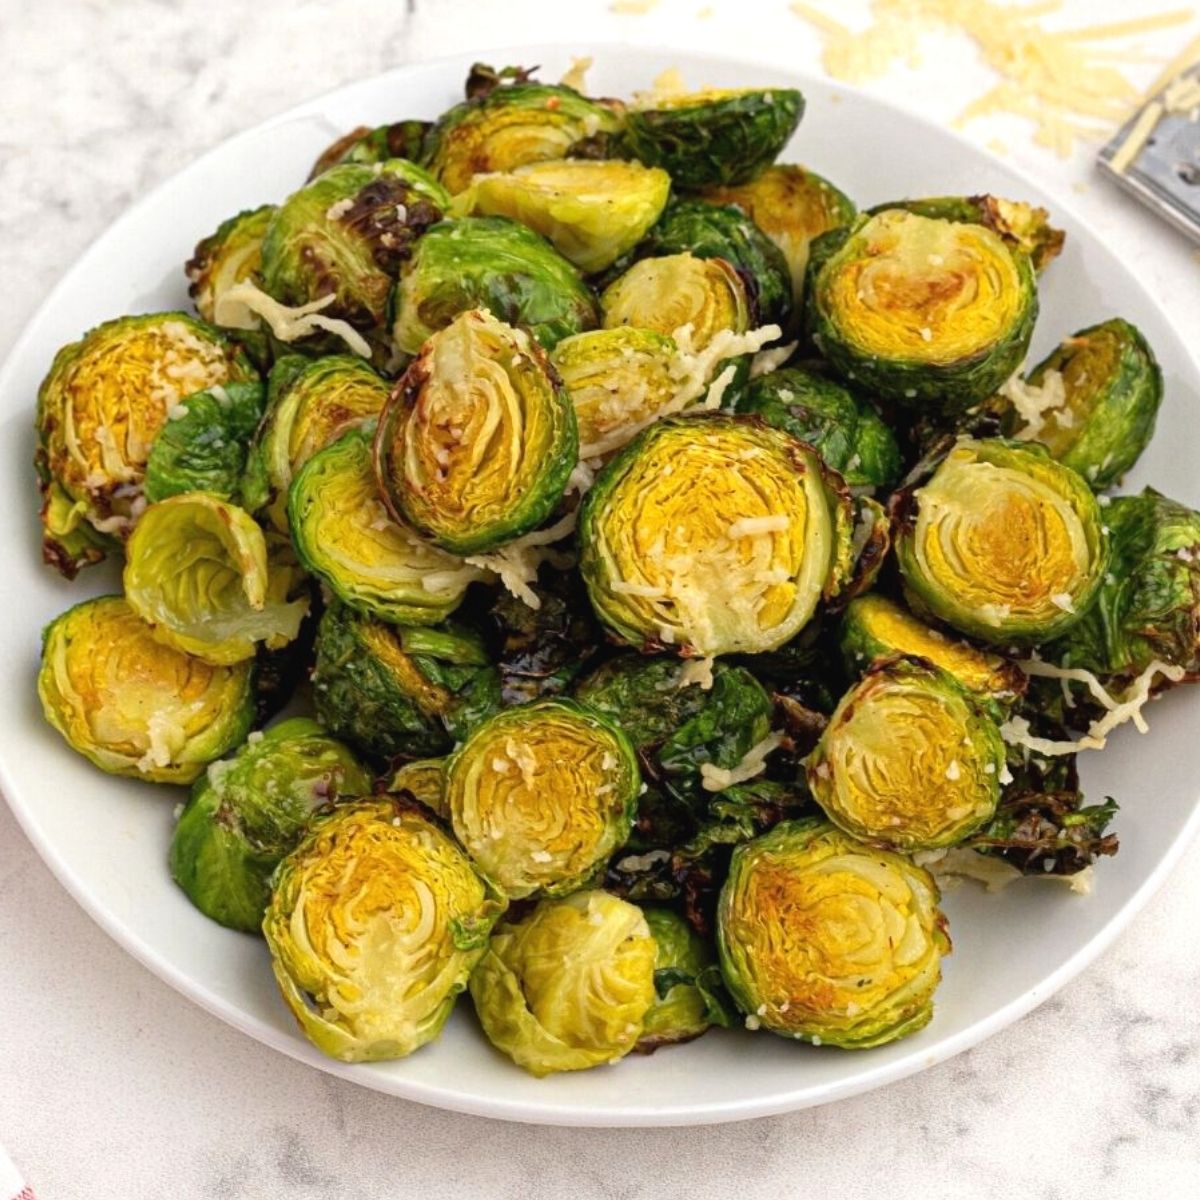 how-long-to-cook-brussel-sprouts-in-air-fryer